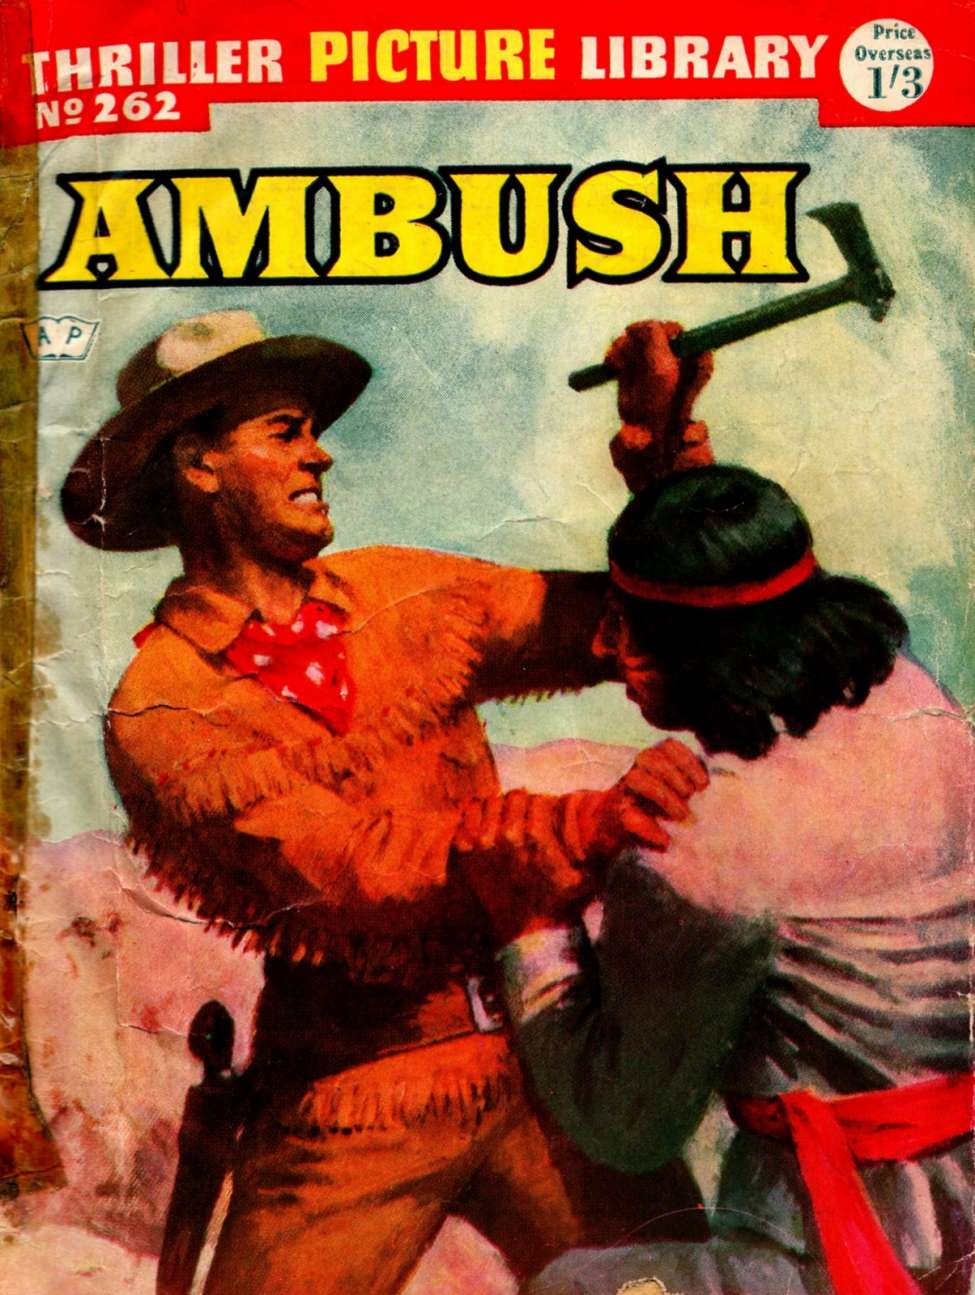 Book Cover For Thriller Picture Library 262 - Ambush